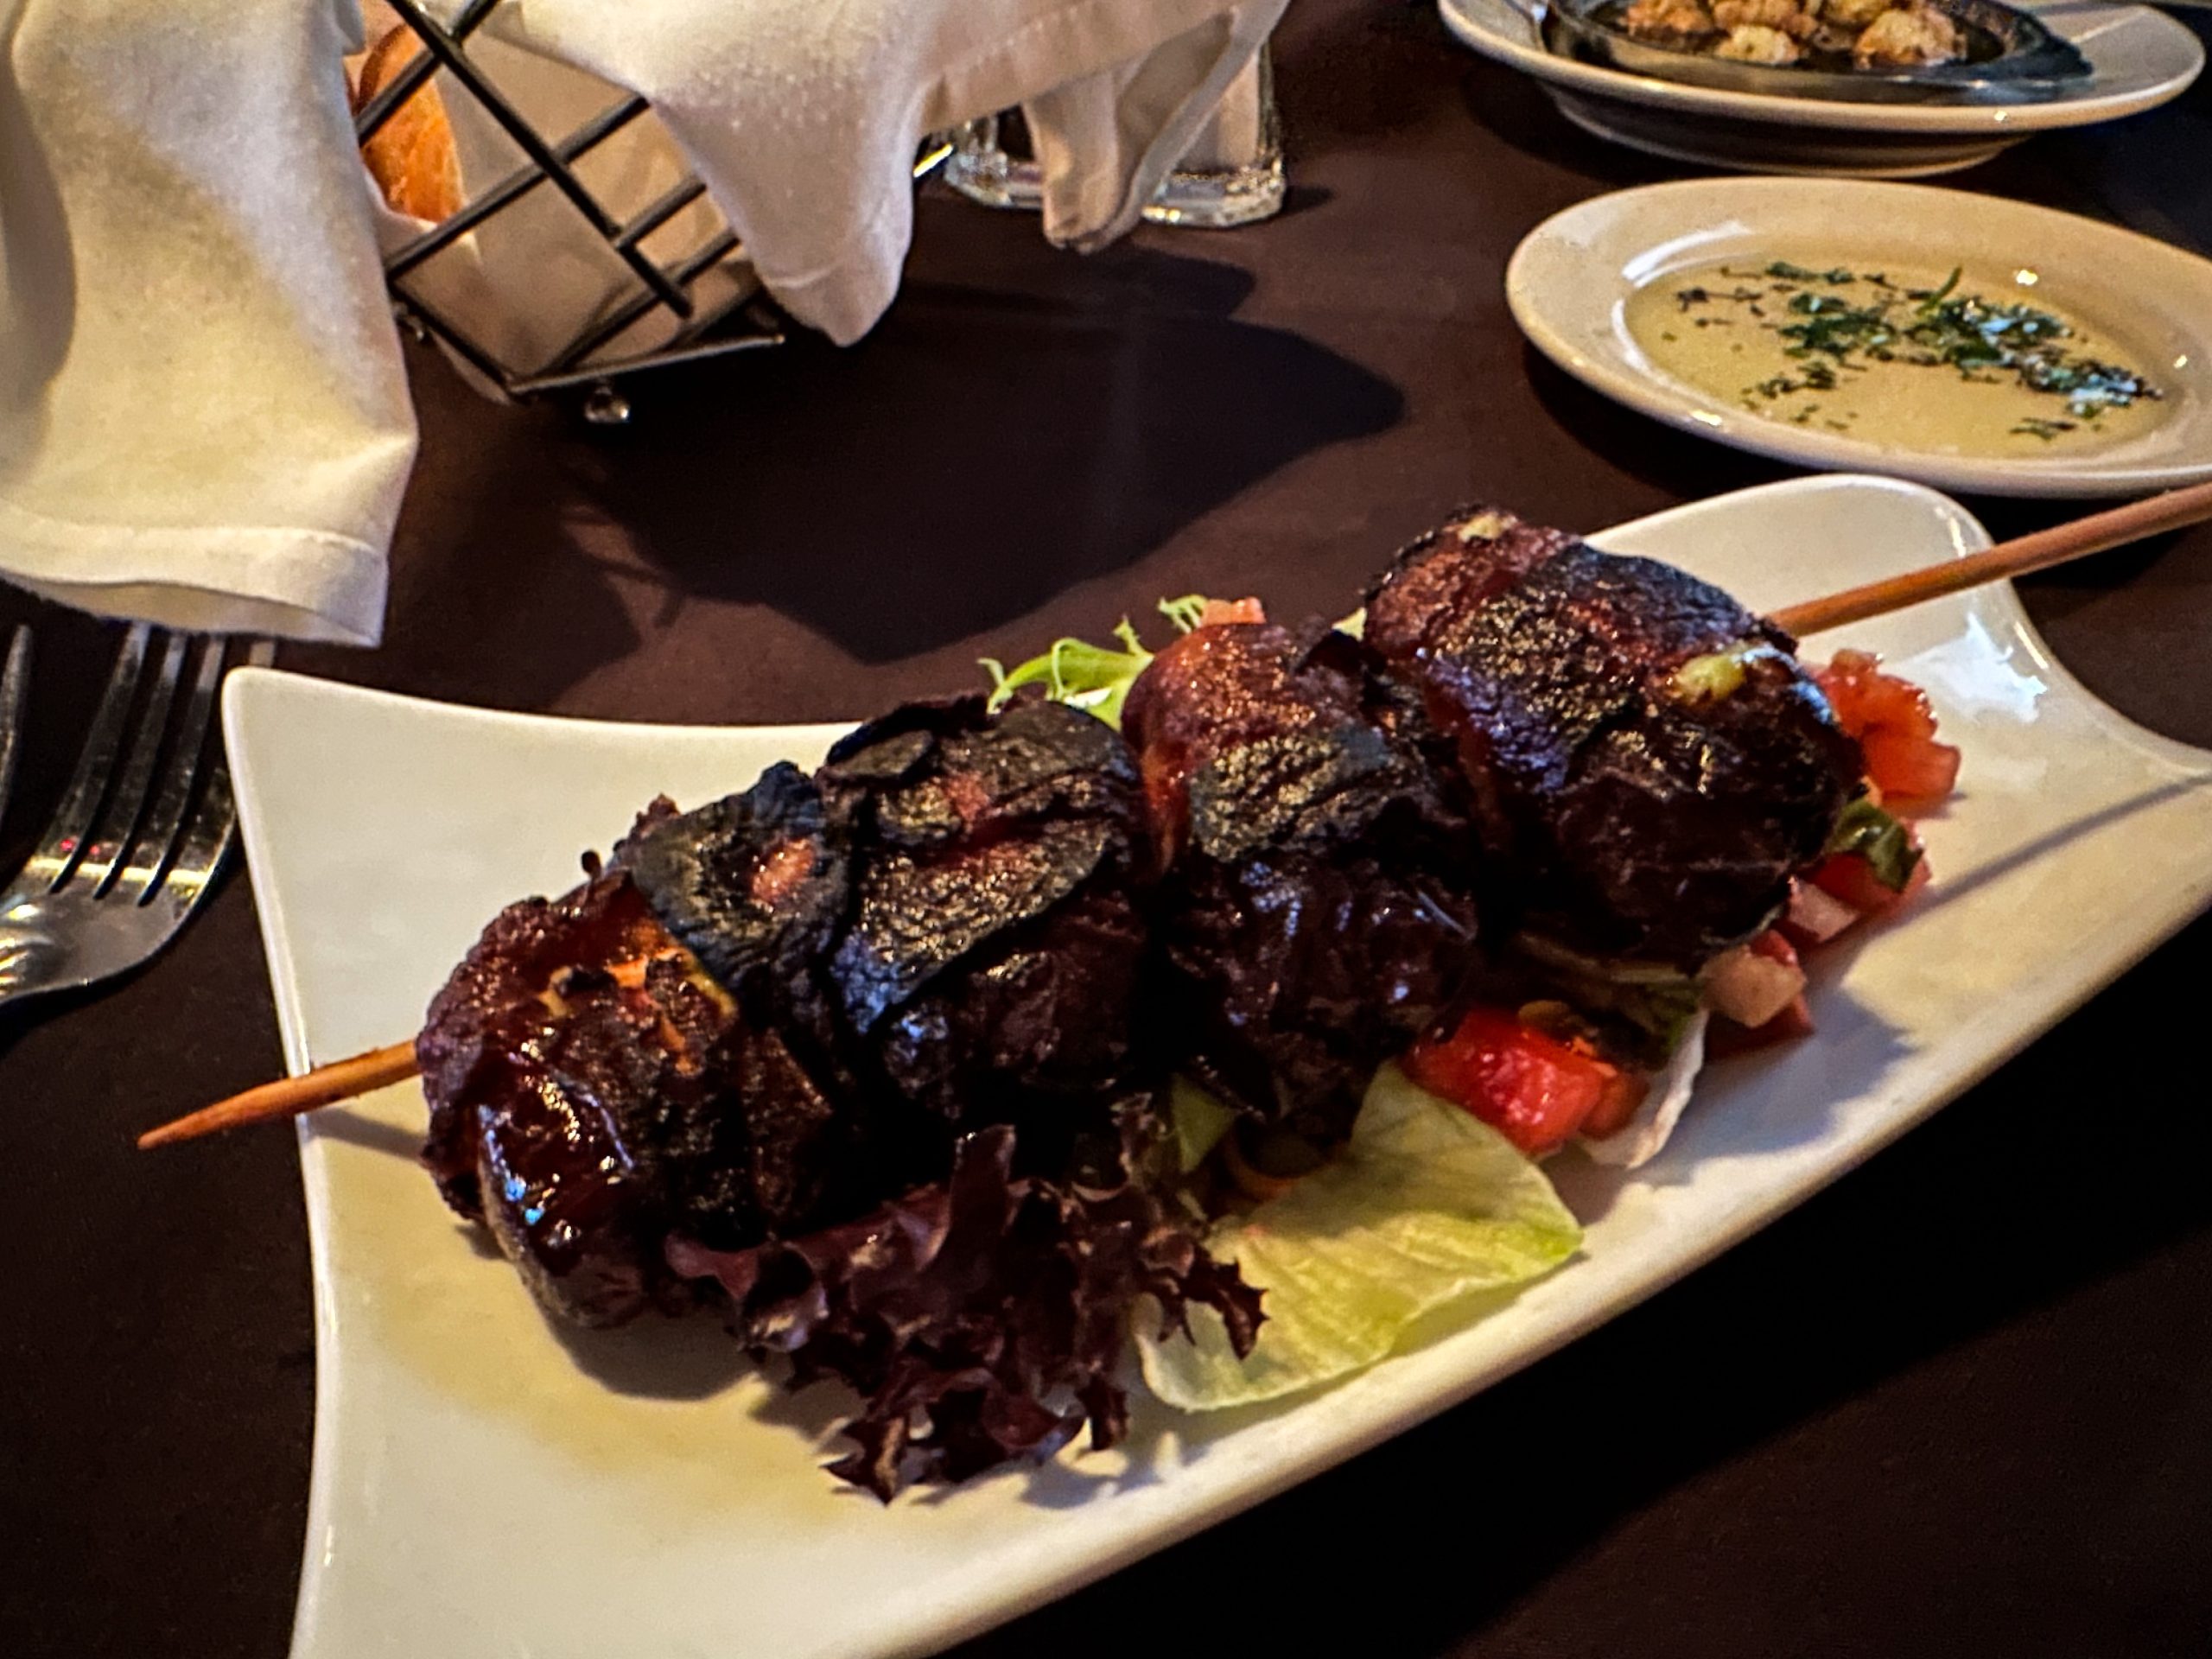 The stuffed dates with goat cheese and jalapeno and wrapped in bacon